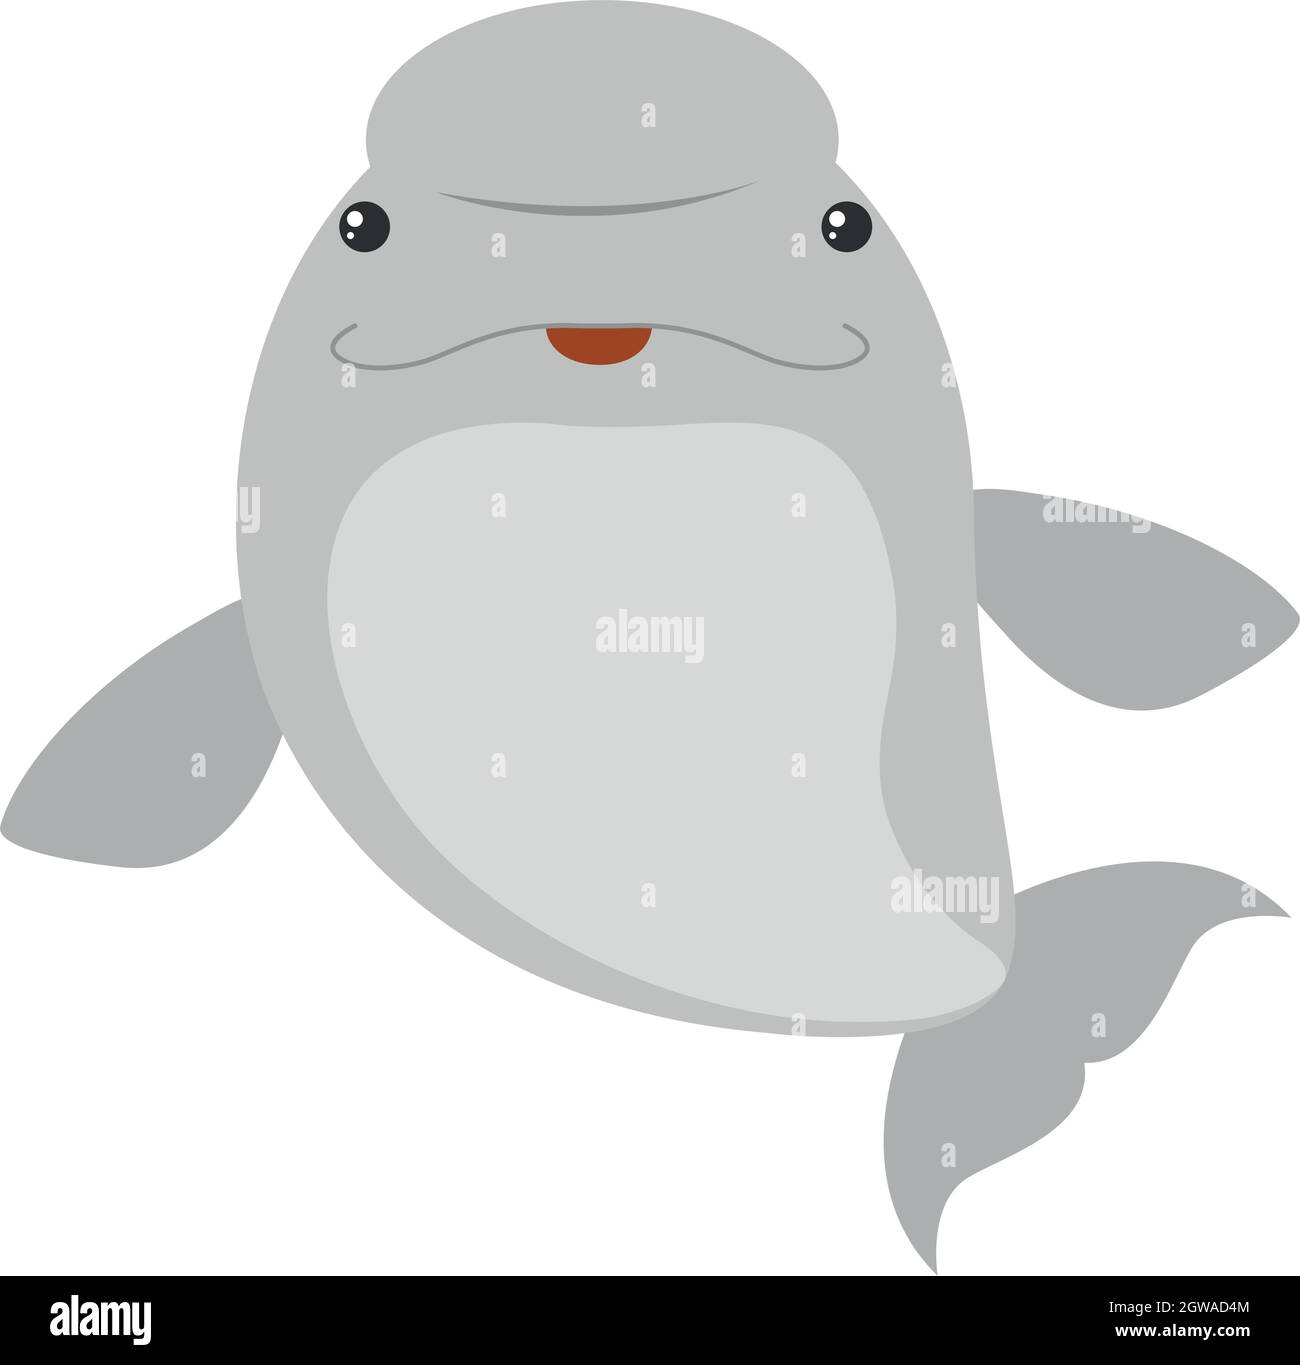 Beluga whale on white background Stock Vector